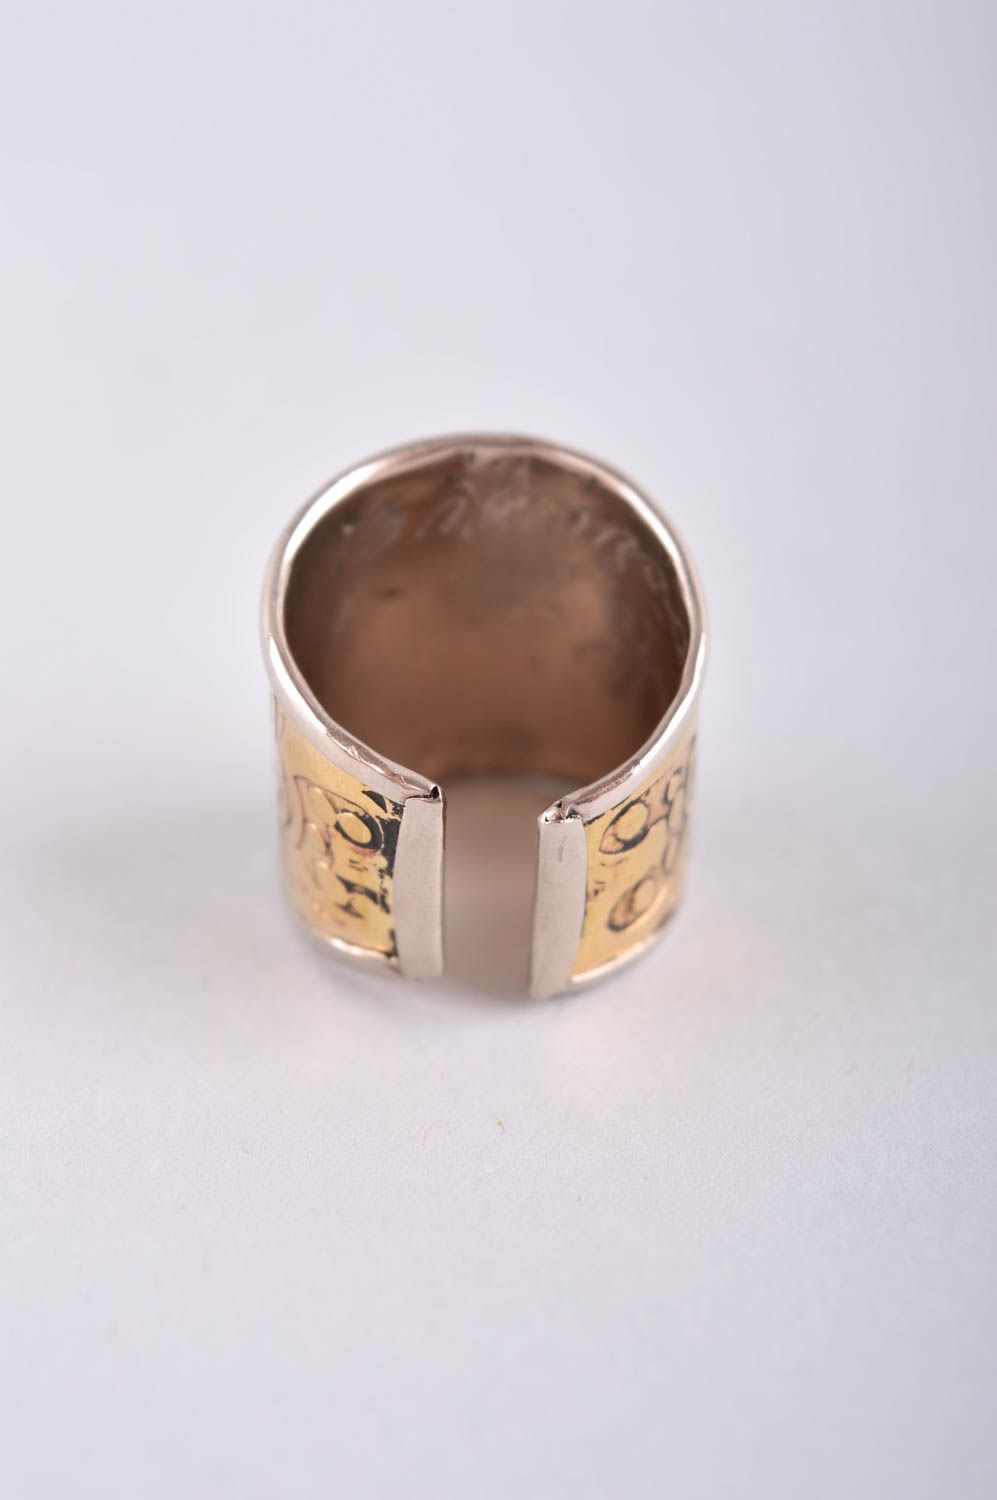 Designer ring unusual gift for women metal accessory brass ring gift ideas photo 4